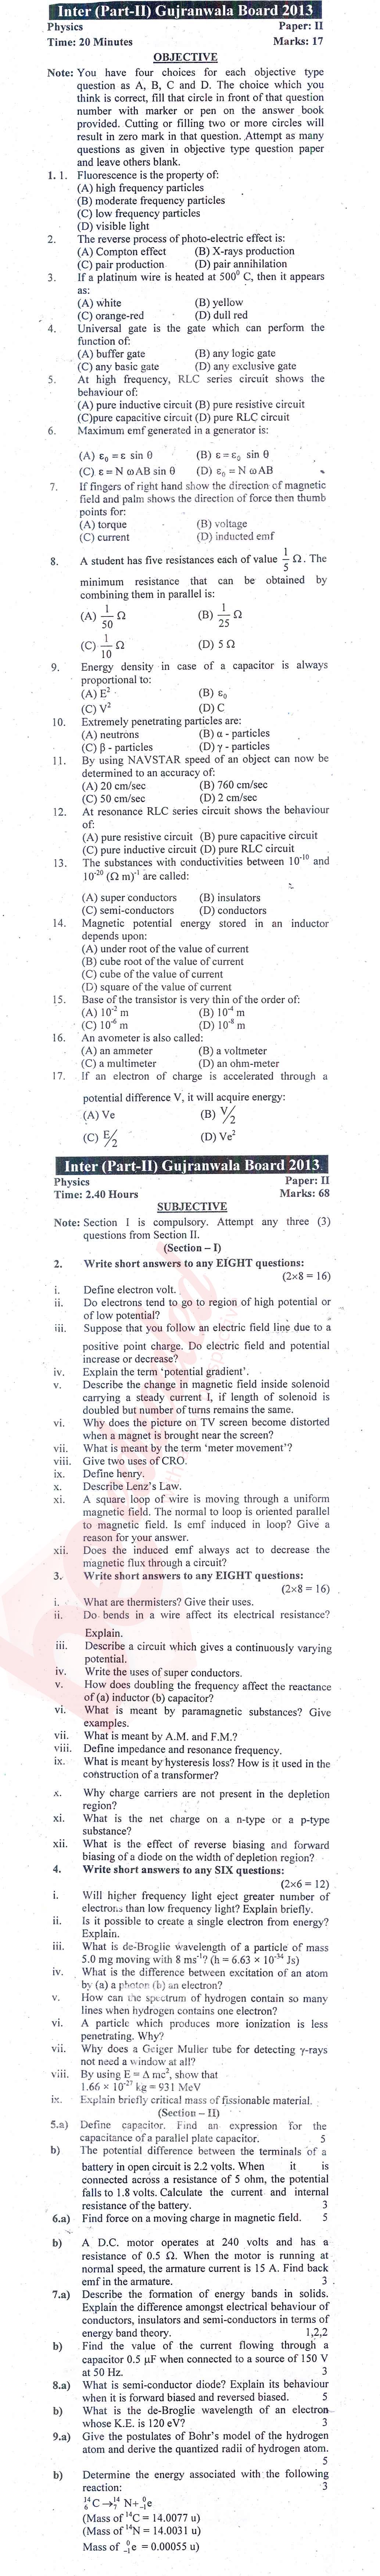 Physics 12th class Past Paper Group 1 BISE Gujranwala 2013